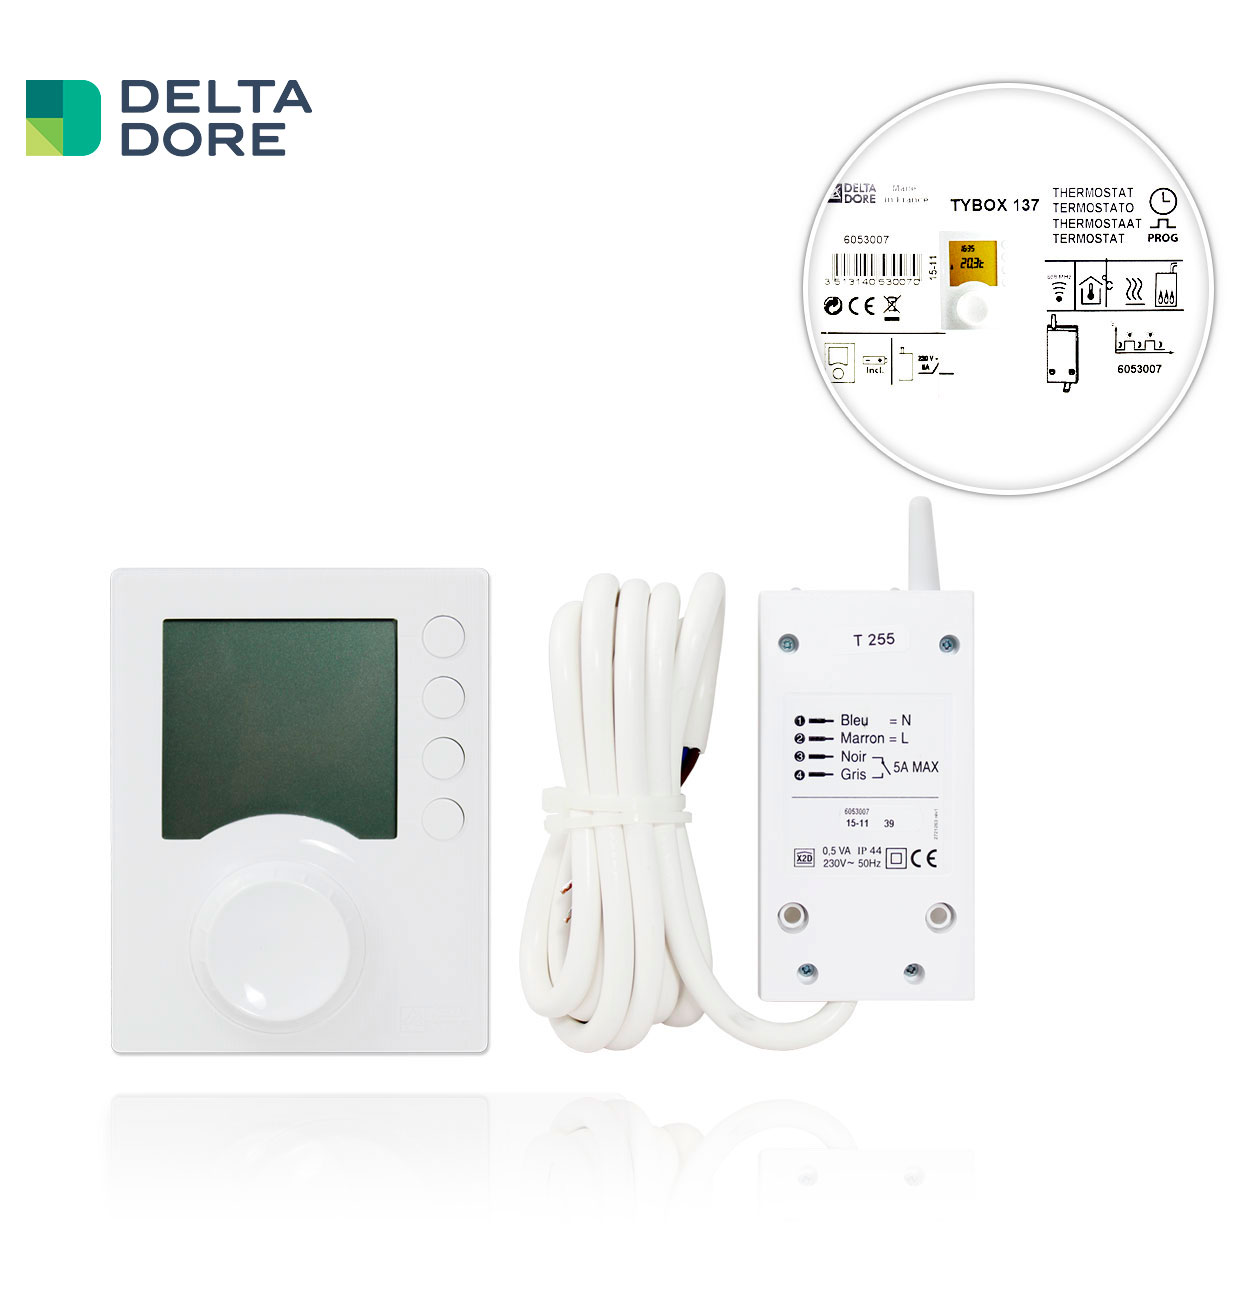 Radio Programmable Thermostat For Heating 6053073 Delta Dore